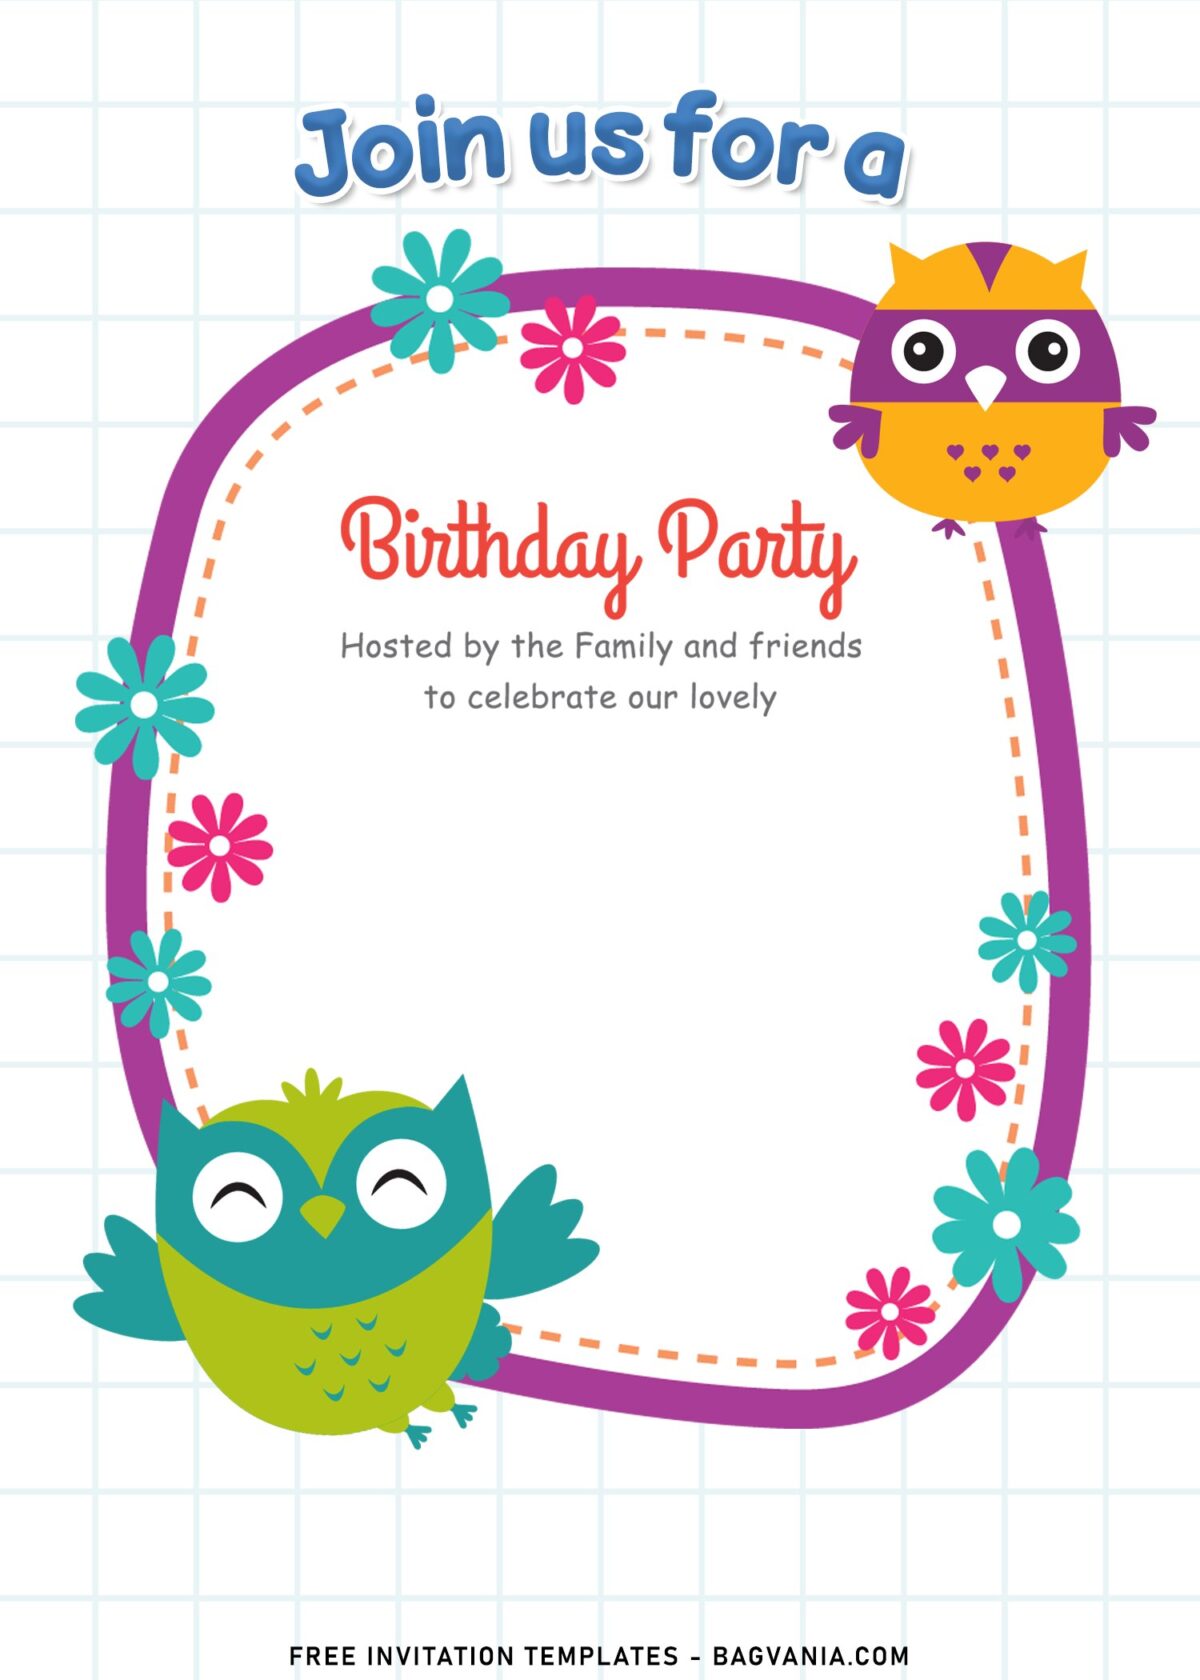 11+ Cute Owl Birthday Invitation Templates For Your Little Ones' Birthday with orange owl